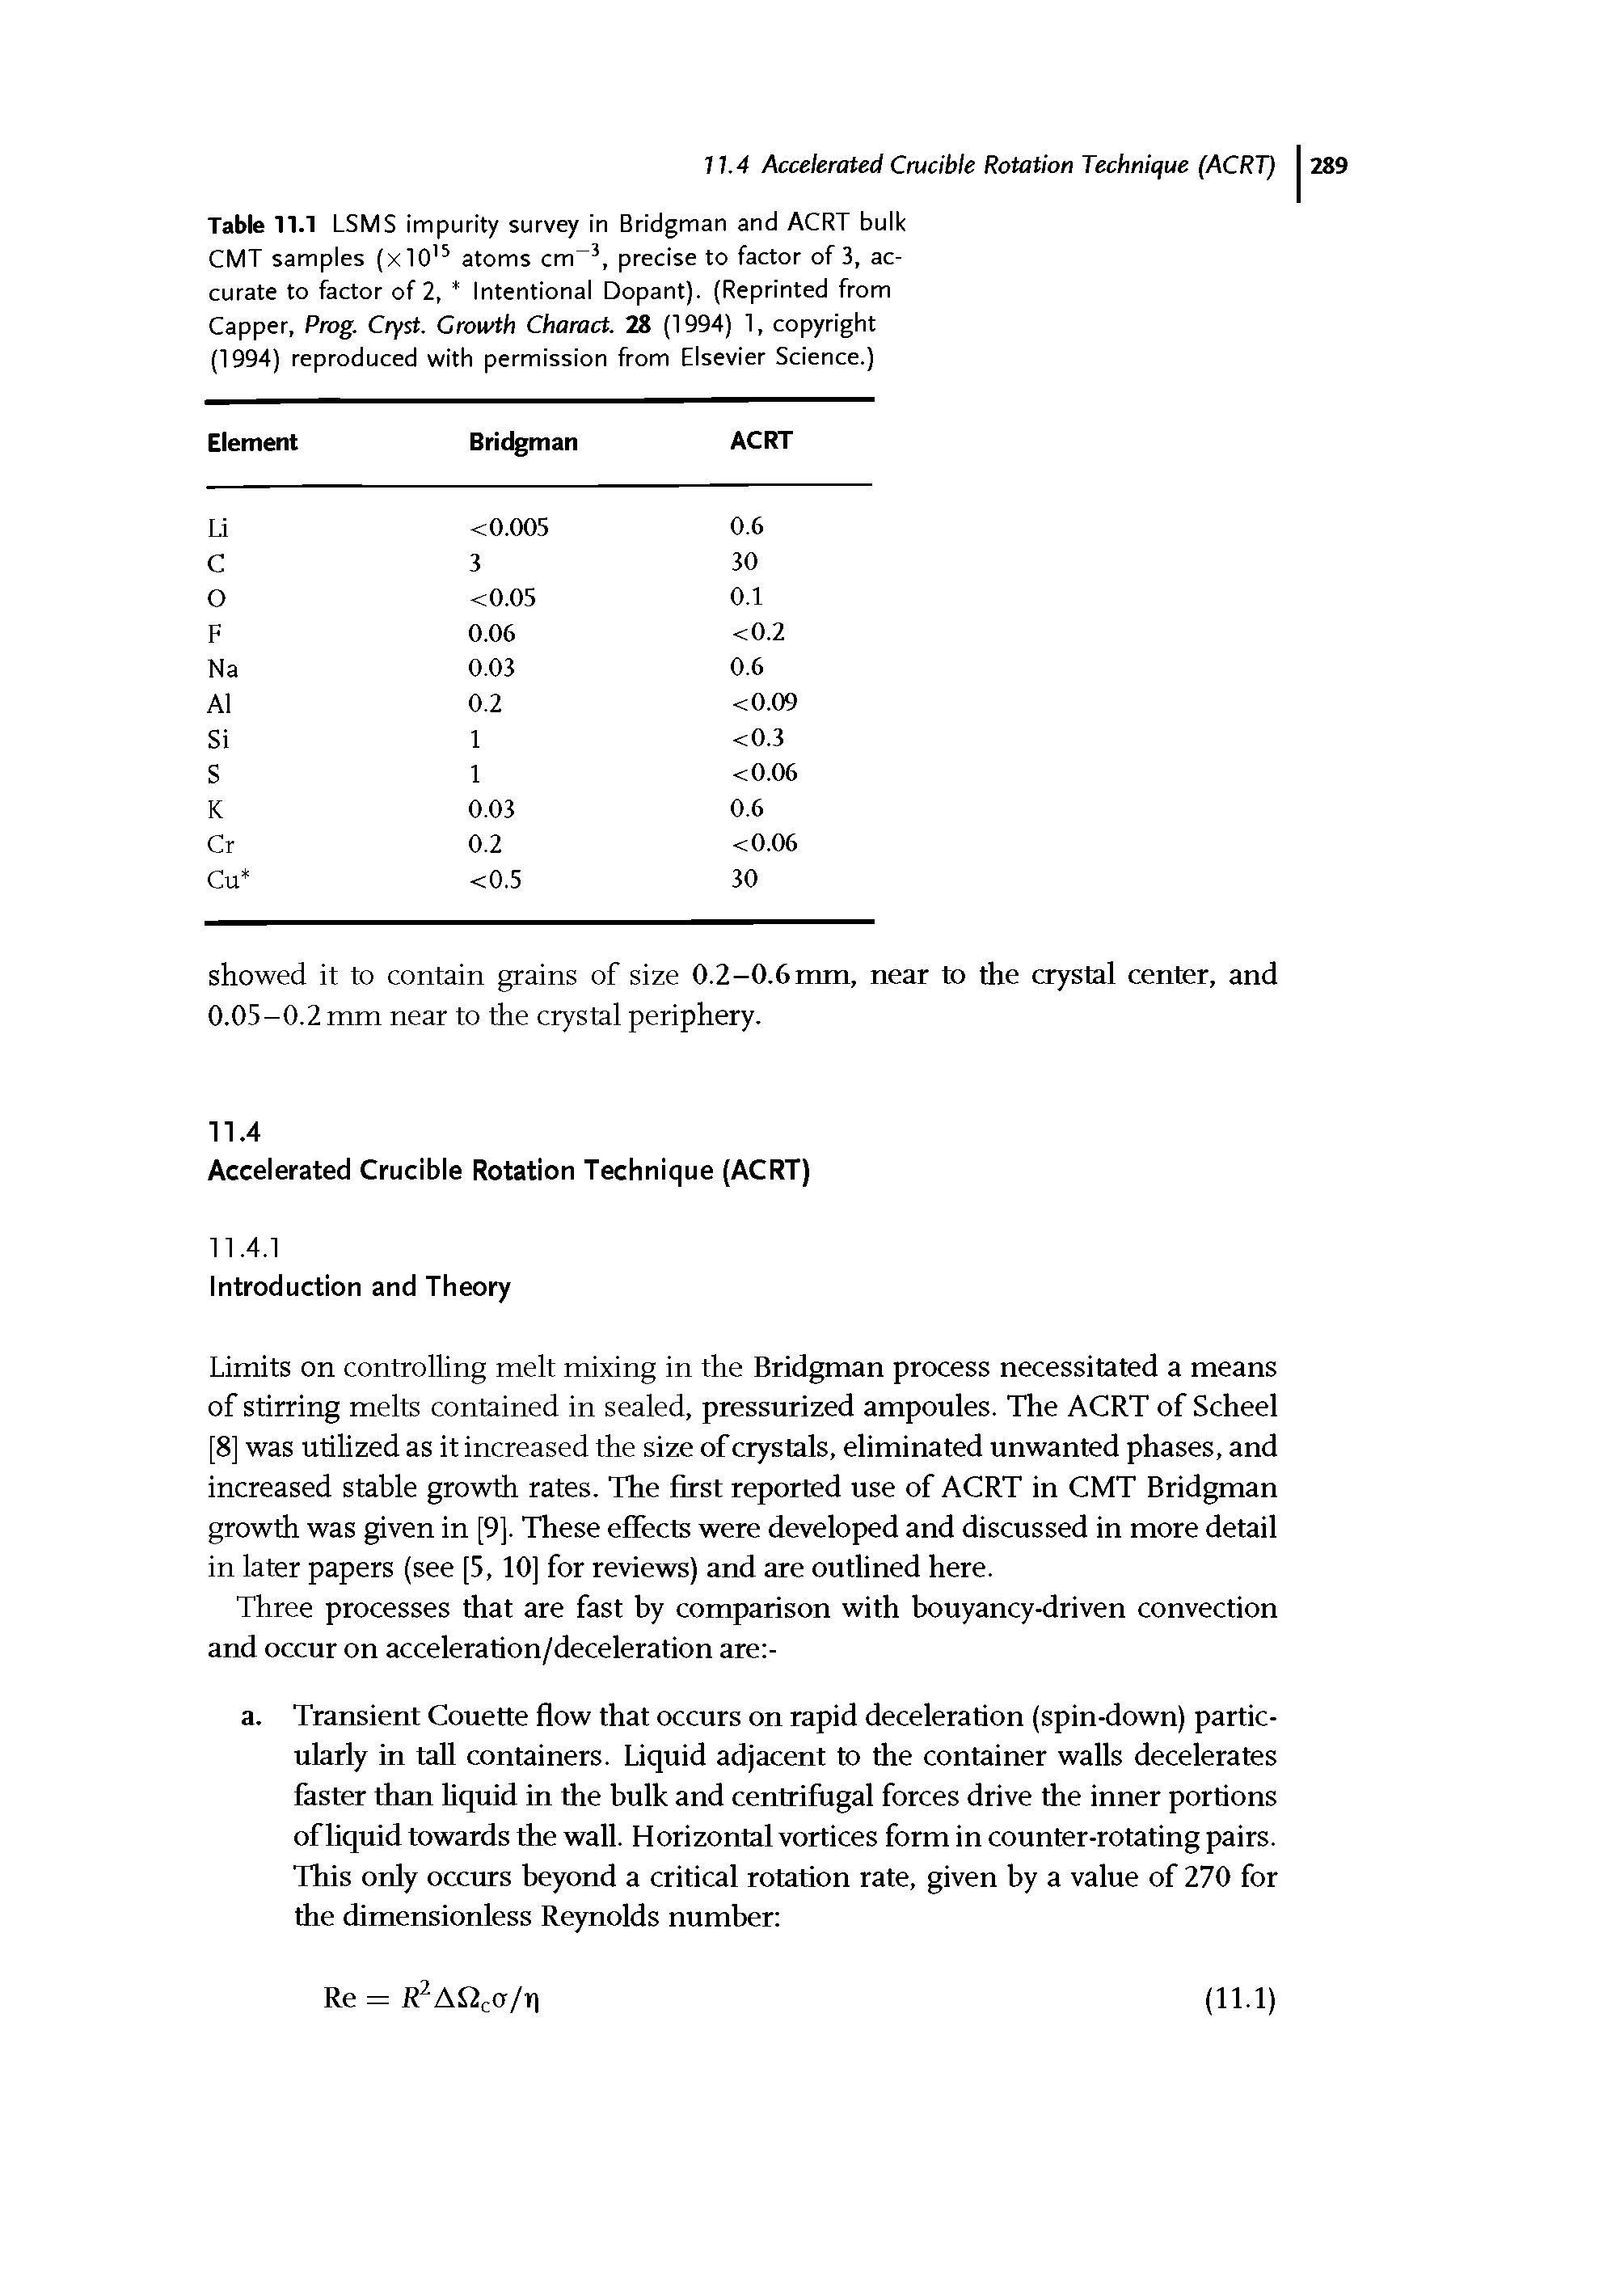 Table 11.1 LSMS impurity survey in Bridgman and ACRT bulk CMT samples (xlO atoms cm , precise to factor of 3, accurate to factor of 2, Intentional Dopant). (Reprinted from Capper, Prog. Cryst. Growth Charact. 28 (1994) 1, copyright (1994) reproduced with permission from Elsevier Science.)...